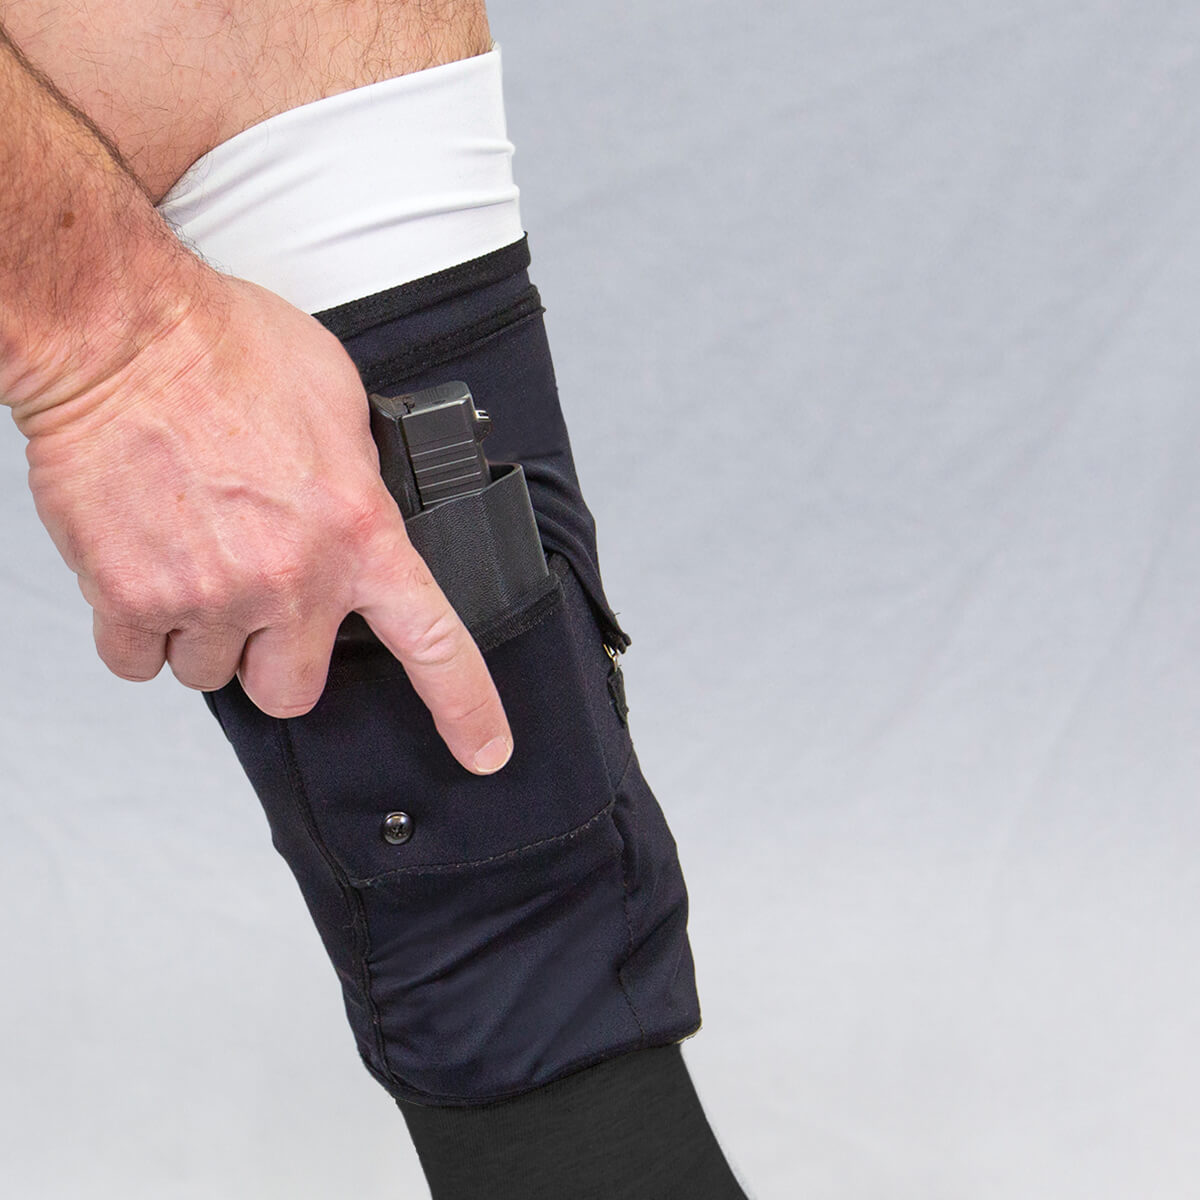 470744_Mid-Calf_Gun-Sox-Pro_with-hand_Side-view_Front-Cover